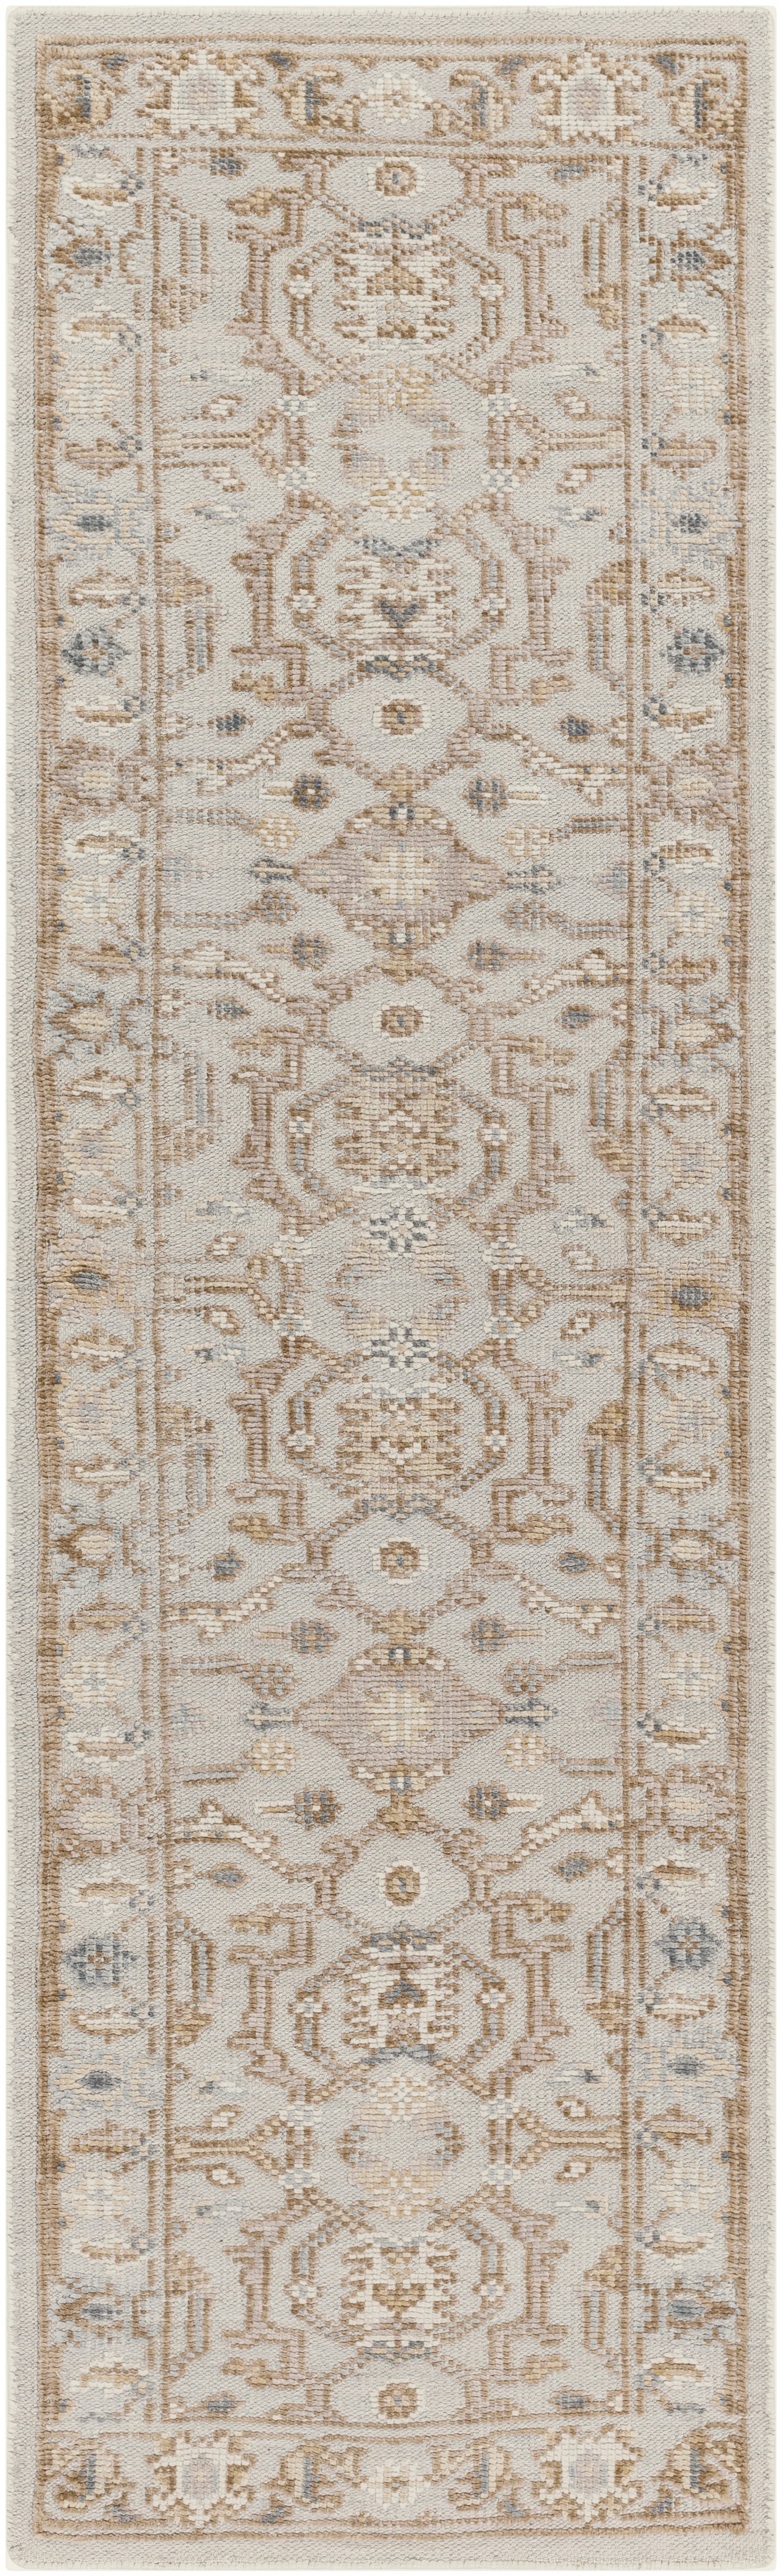 Revere 29315 Hand Knotted Synthetic Blend Indoor/Outdoor Area Rug by Surya Rugs